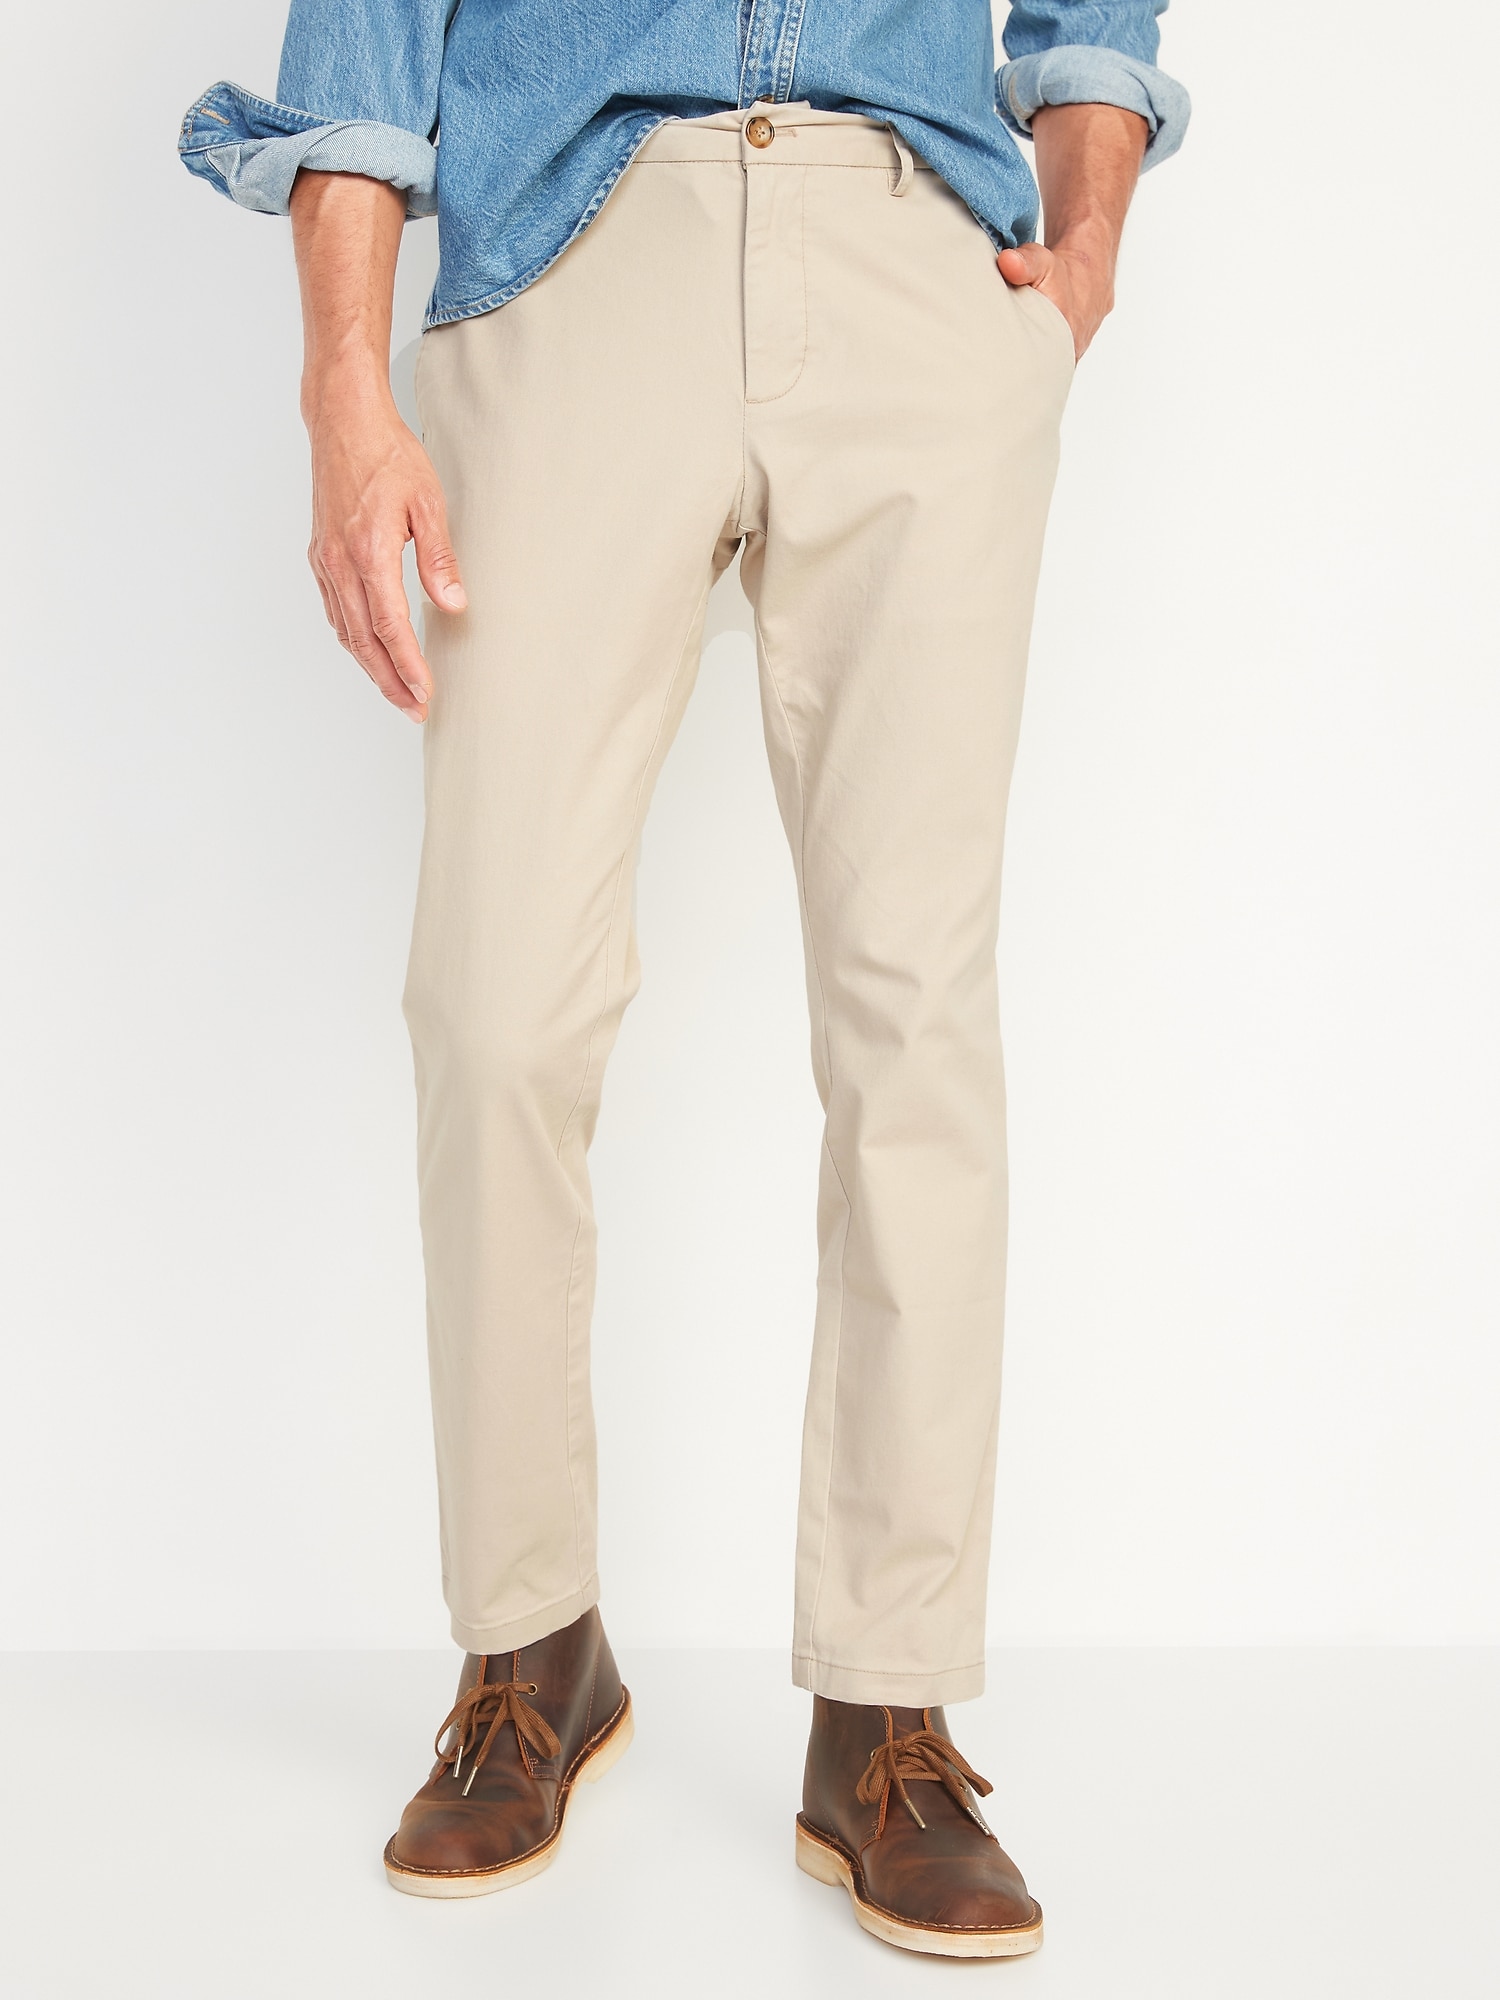 Old Navy Wow Straight FivePocket Pants for Men  Hillcrest Mall